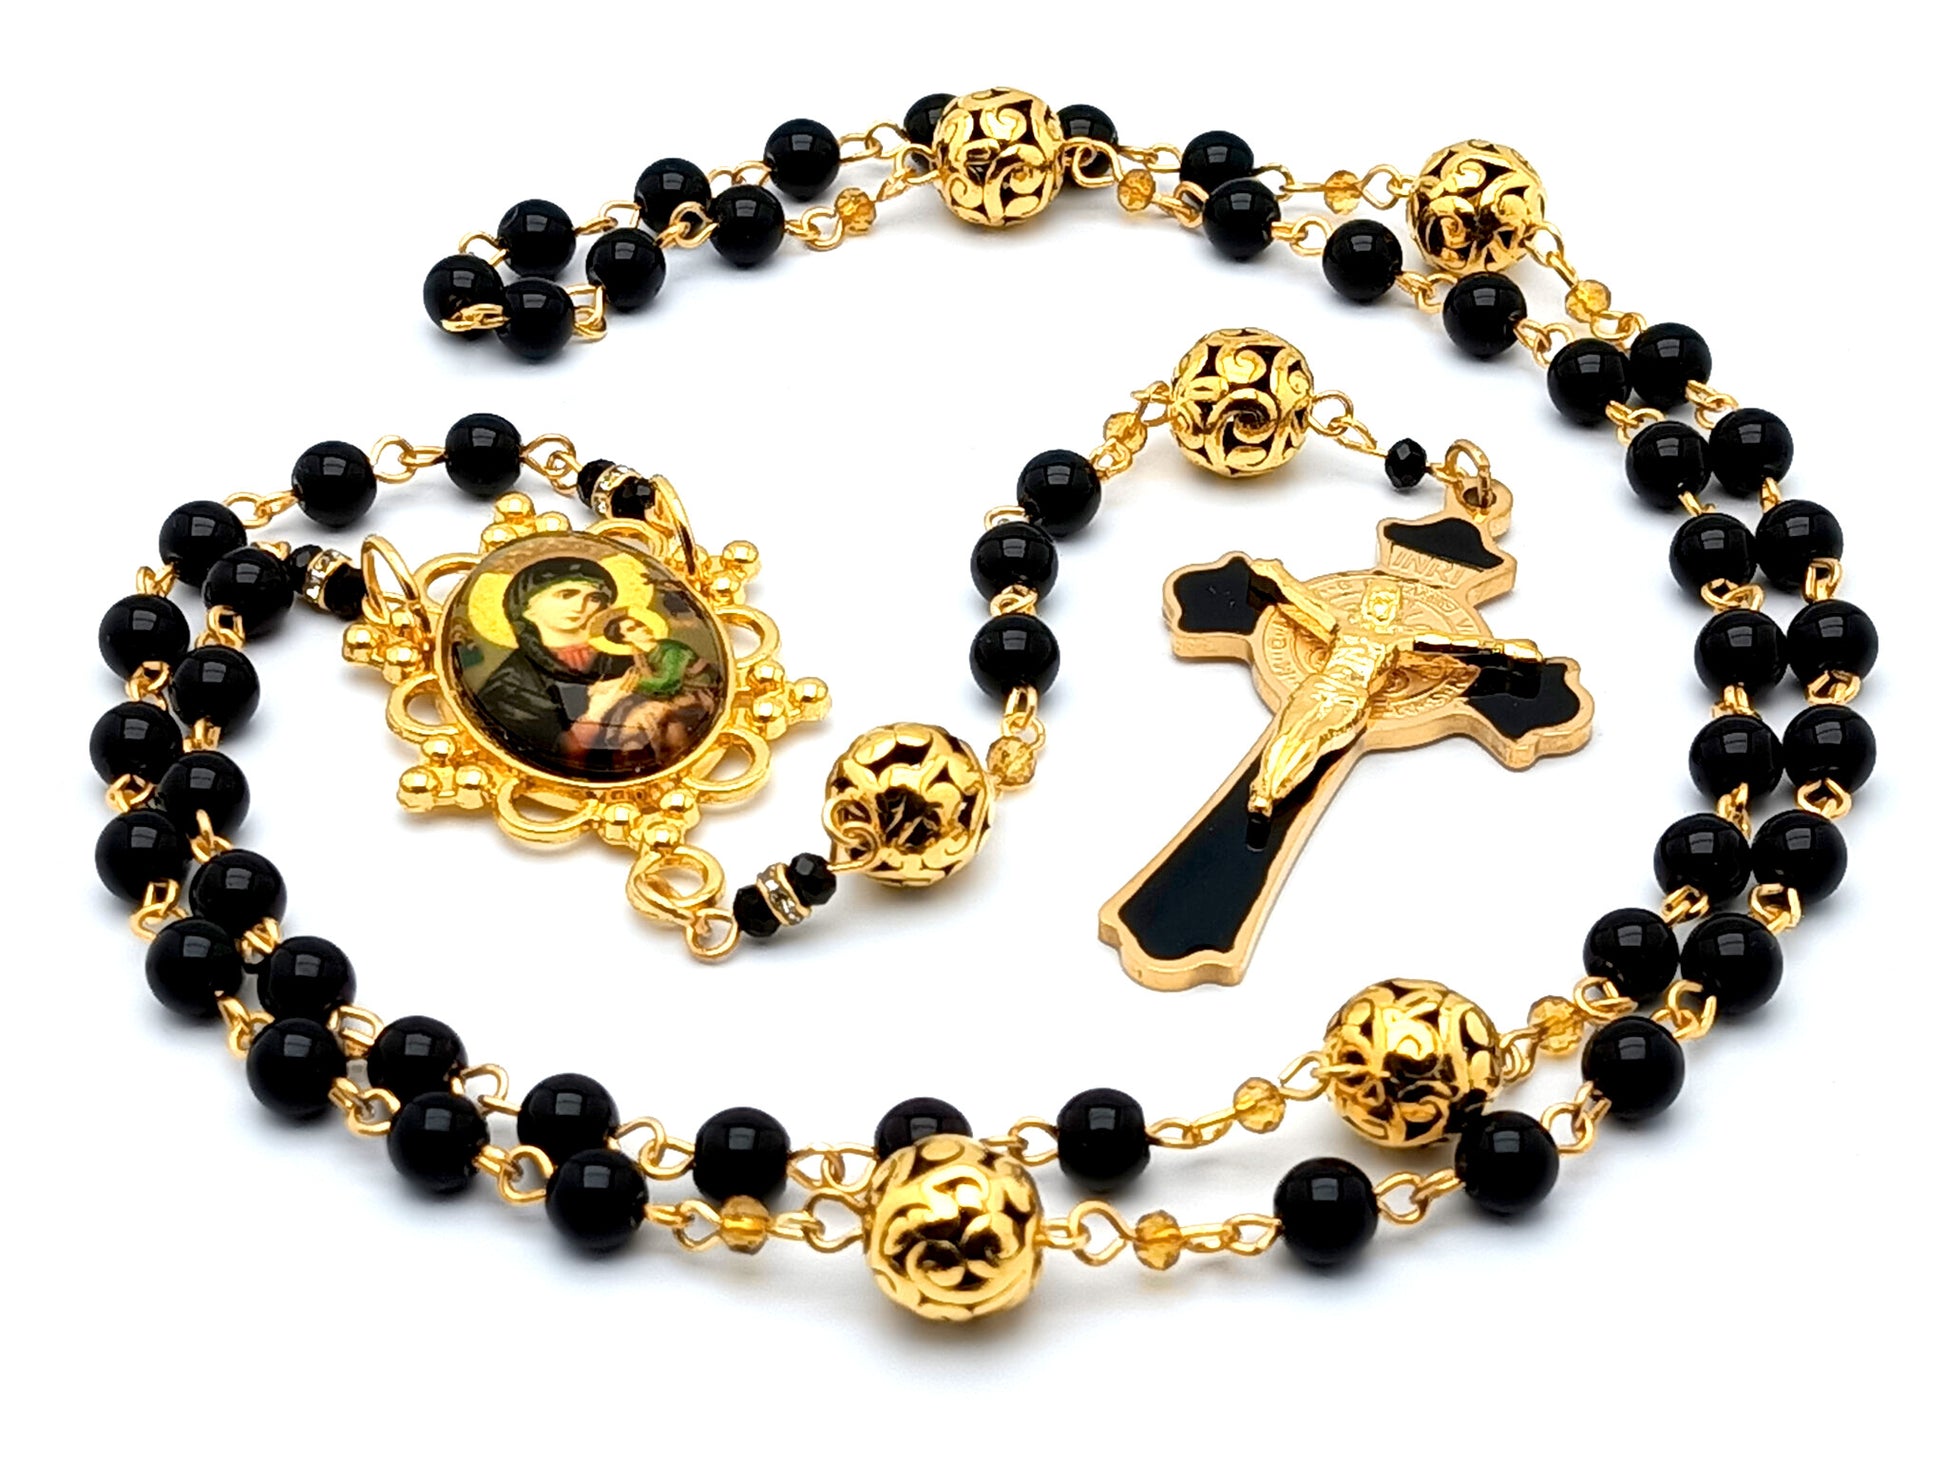 Our Lady of Perpetual Help unique rosary beads with gold and onyx gemstone beads and black enamel Saint Benedict stainless steel crucifix.